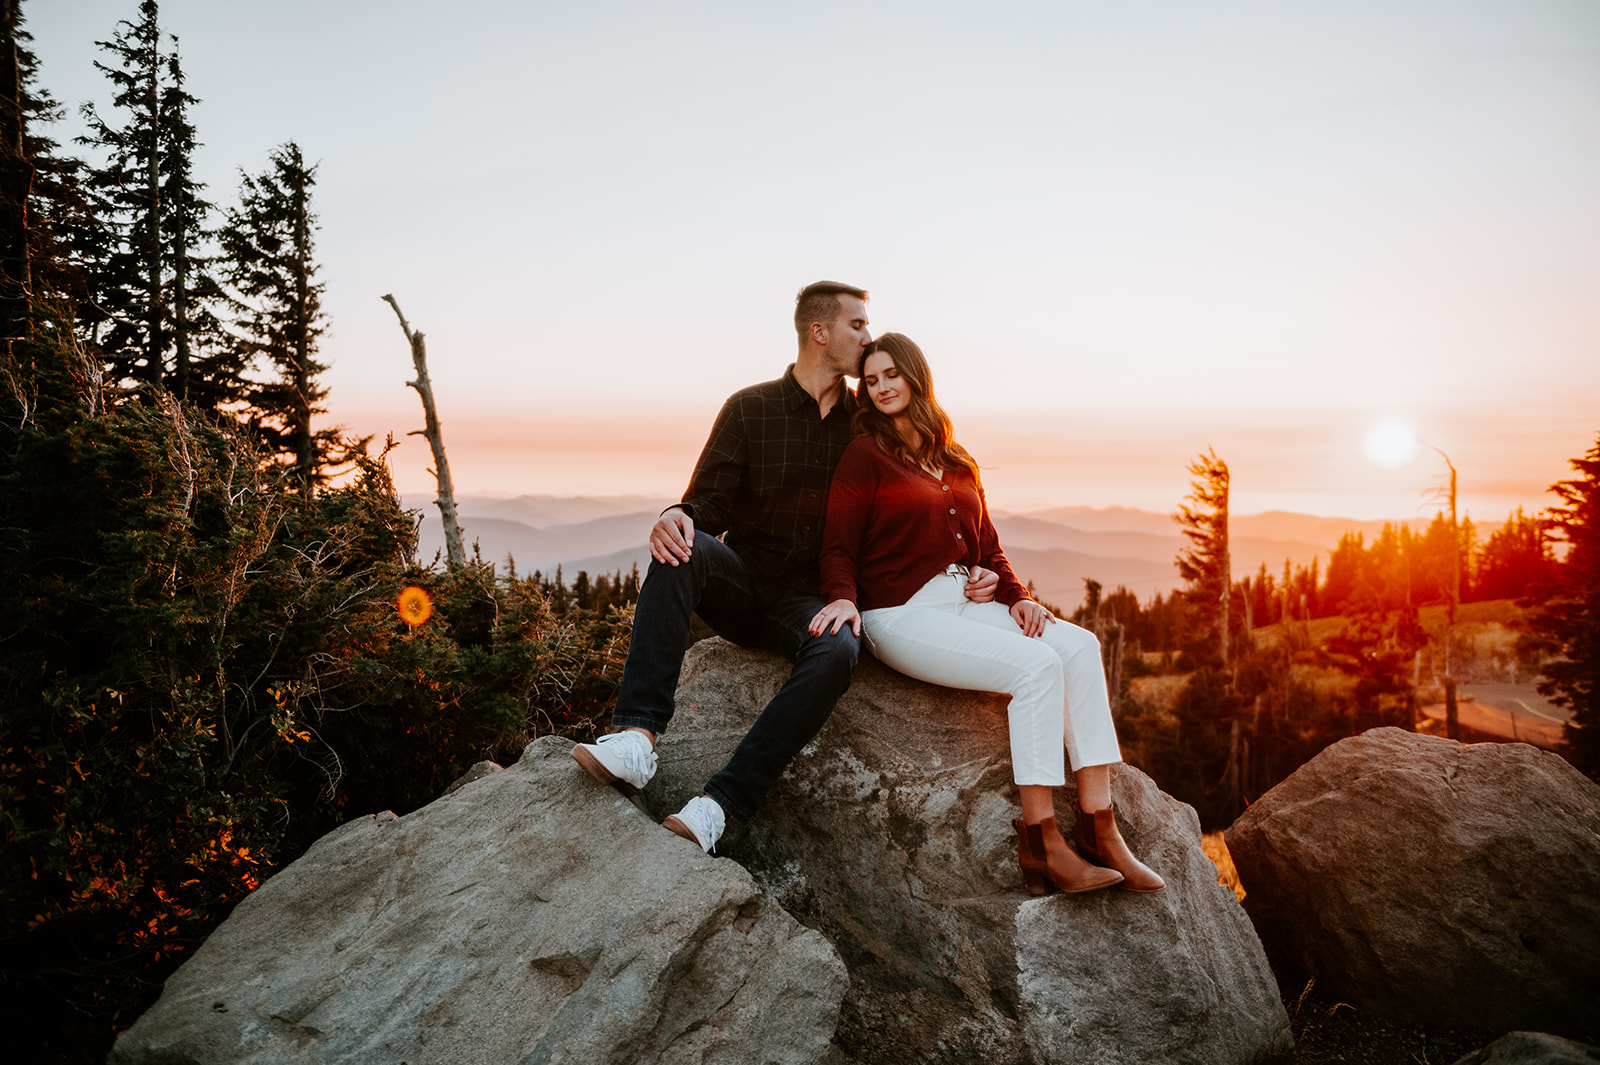 Couple sitting on a rock nuzzled up together watching the sunset for engagement photos